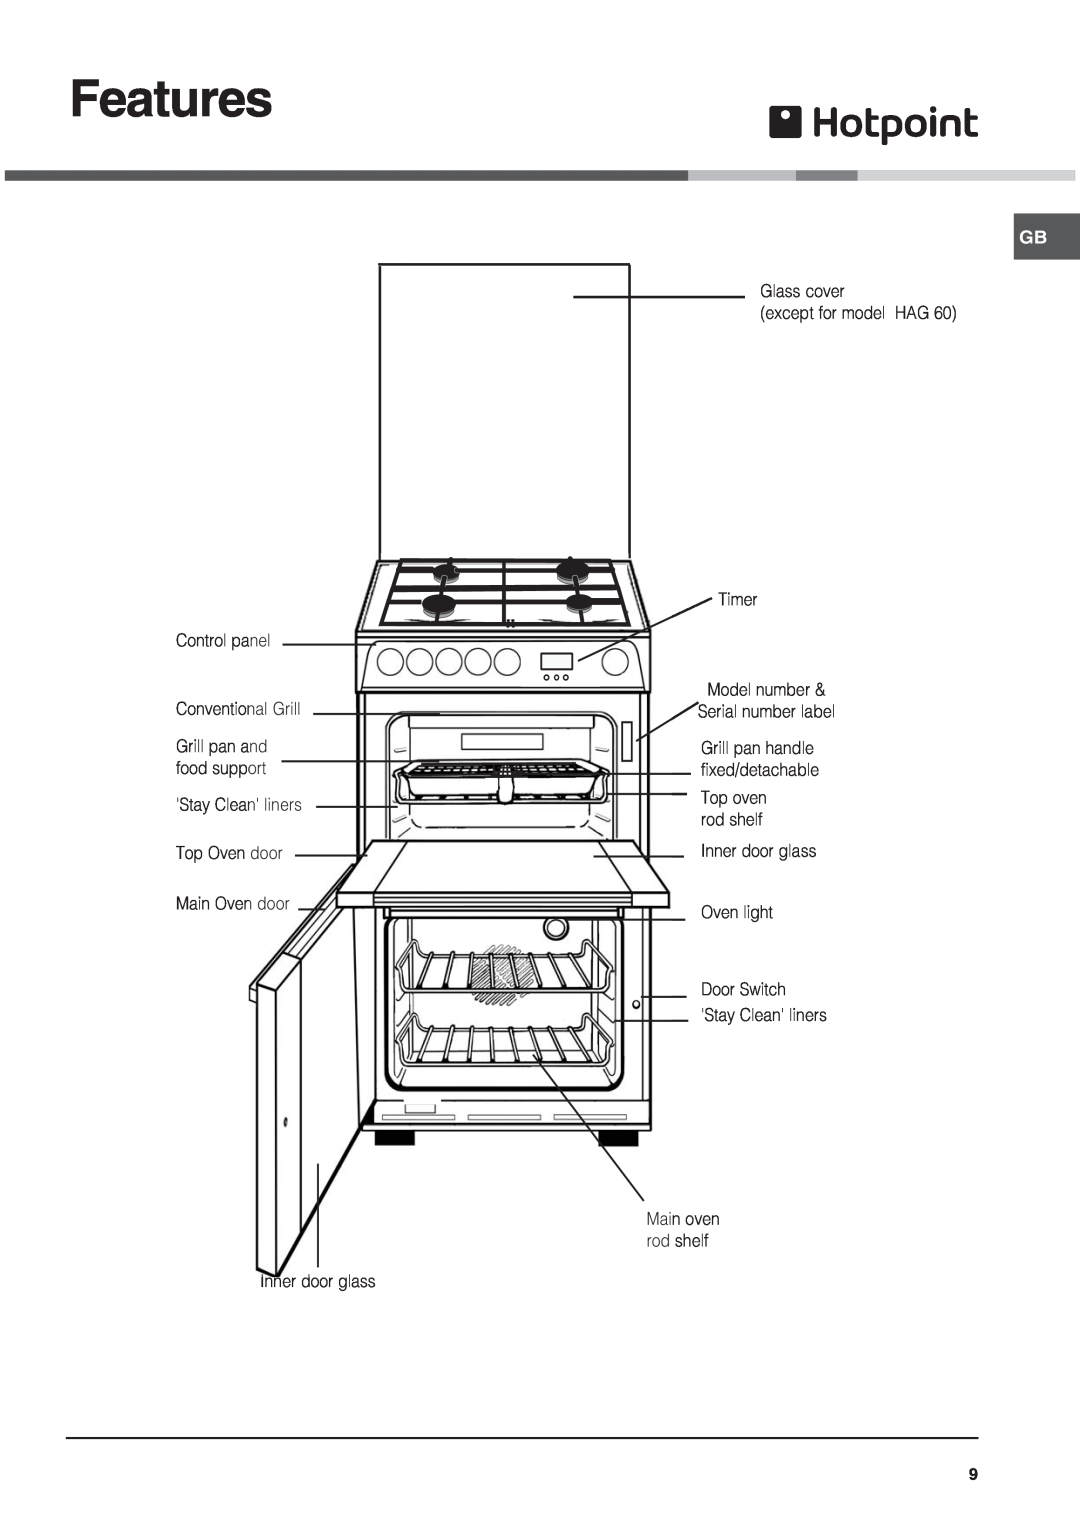 Xerox 62DGW, DSG60S, HUL 61 Features, Control panel Conventional Grill Grill pan and food support, Serial number label 